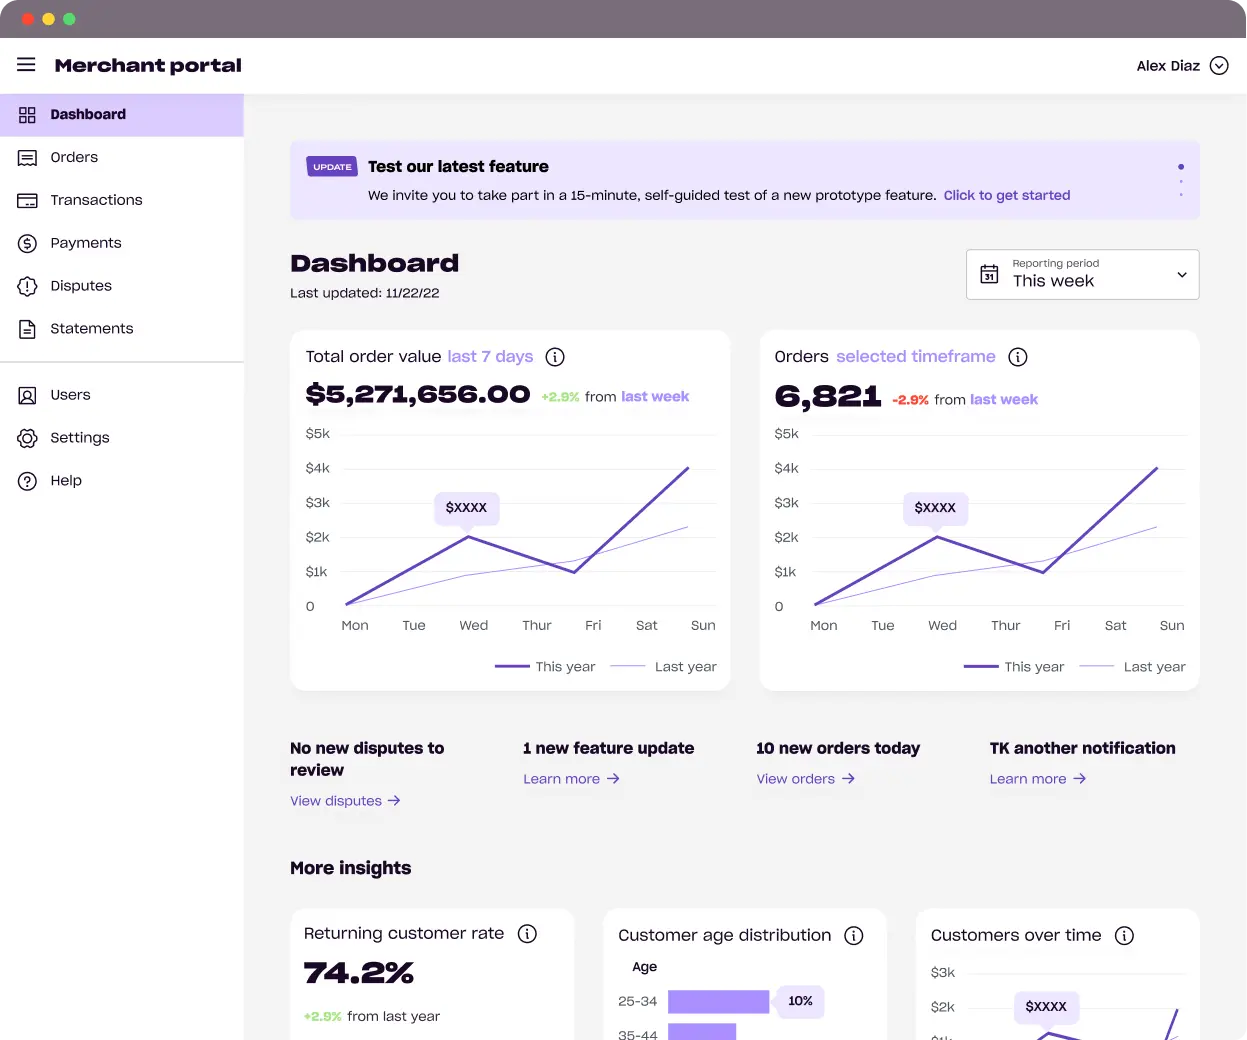 screenshot of the Zip Merchant Portal showing the dashboard with graphs and metrics